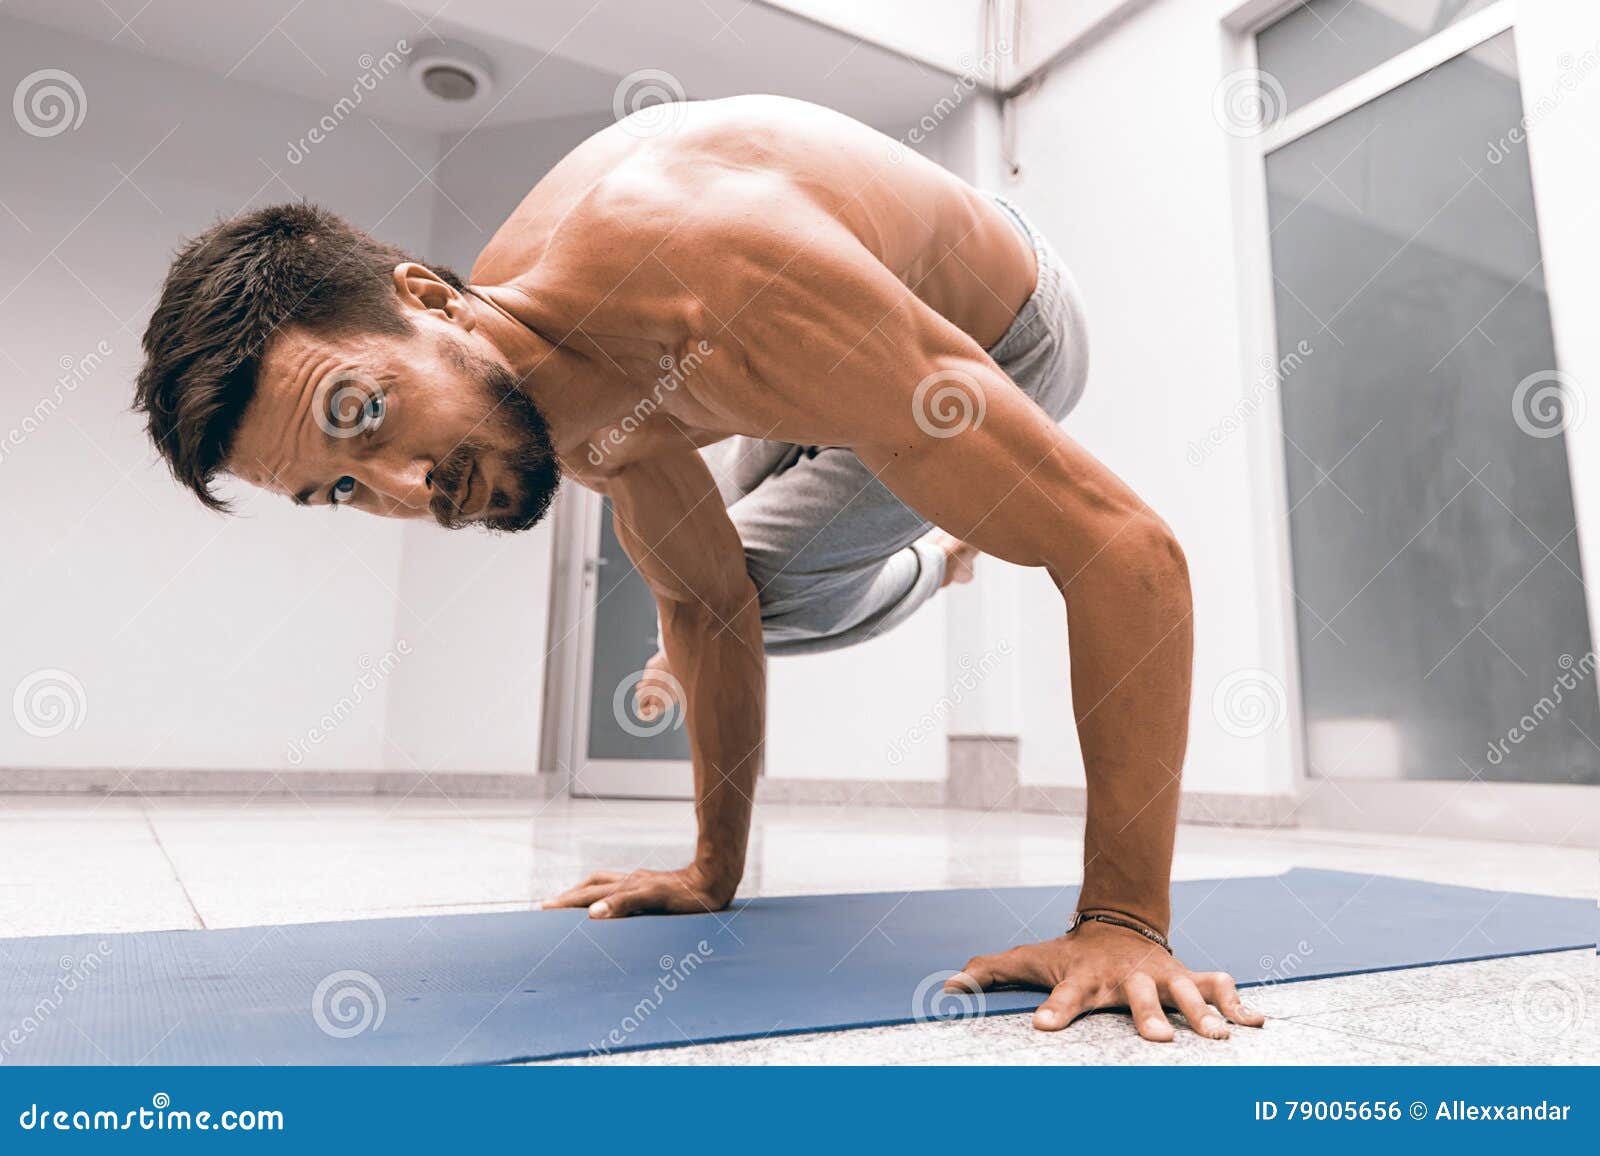 https://thumbs.dreamstime.com/z/athletic-strong-man-practicing-difficult-yoga-pose-79005656.jpg